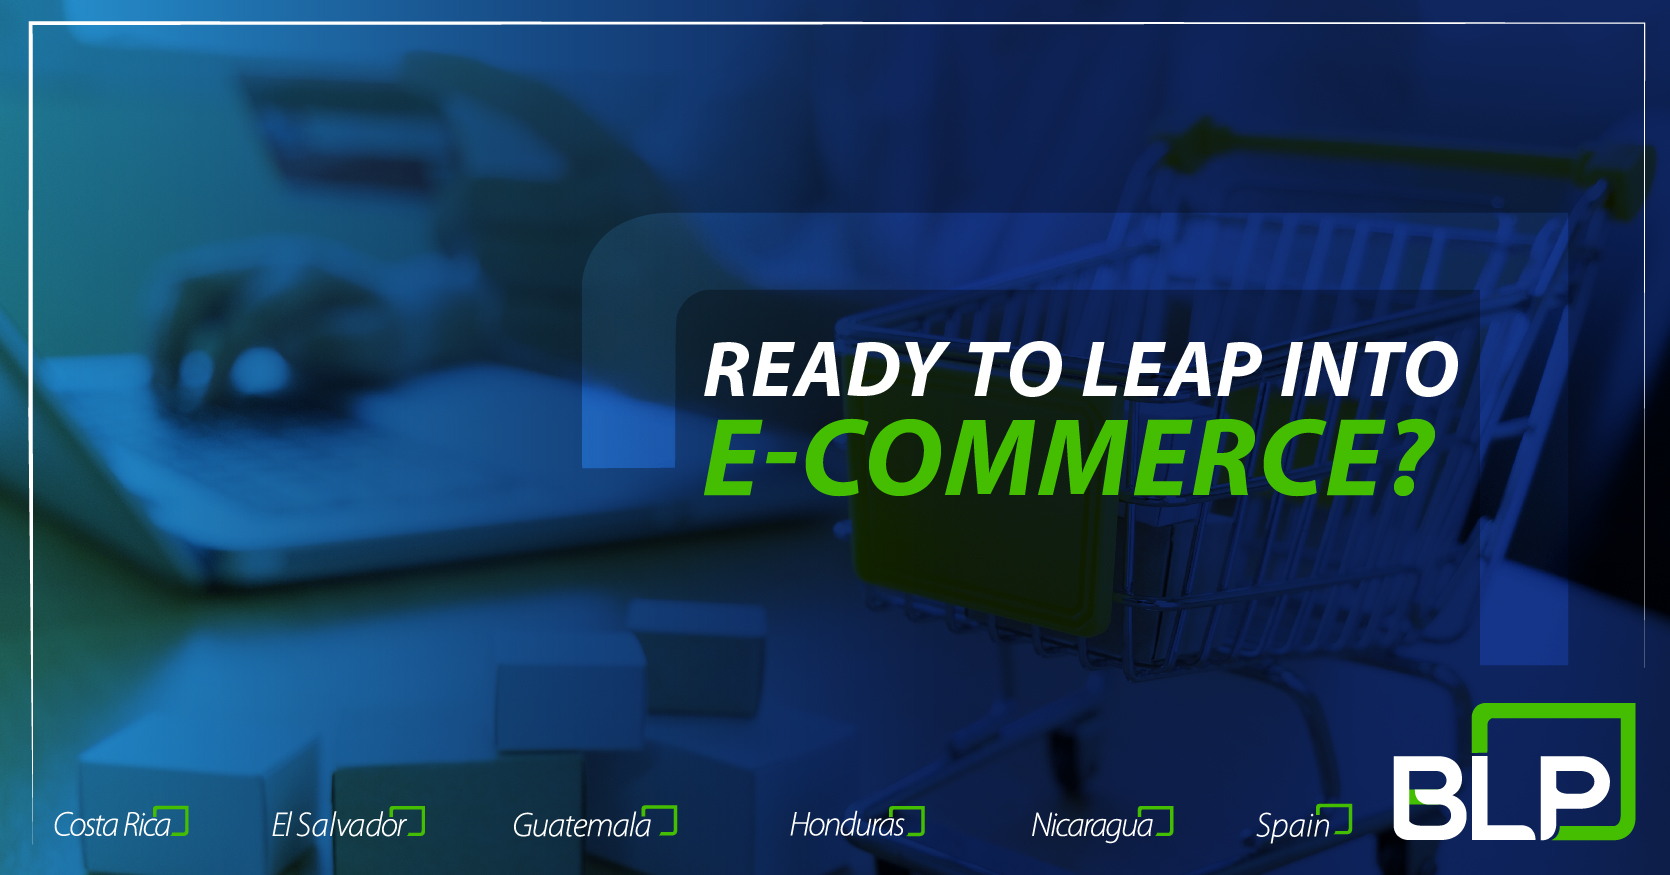 Learn what you need to leap into e-commerce